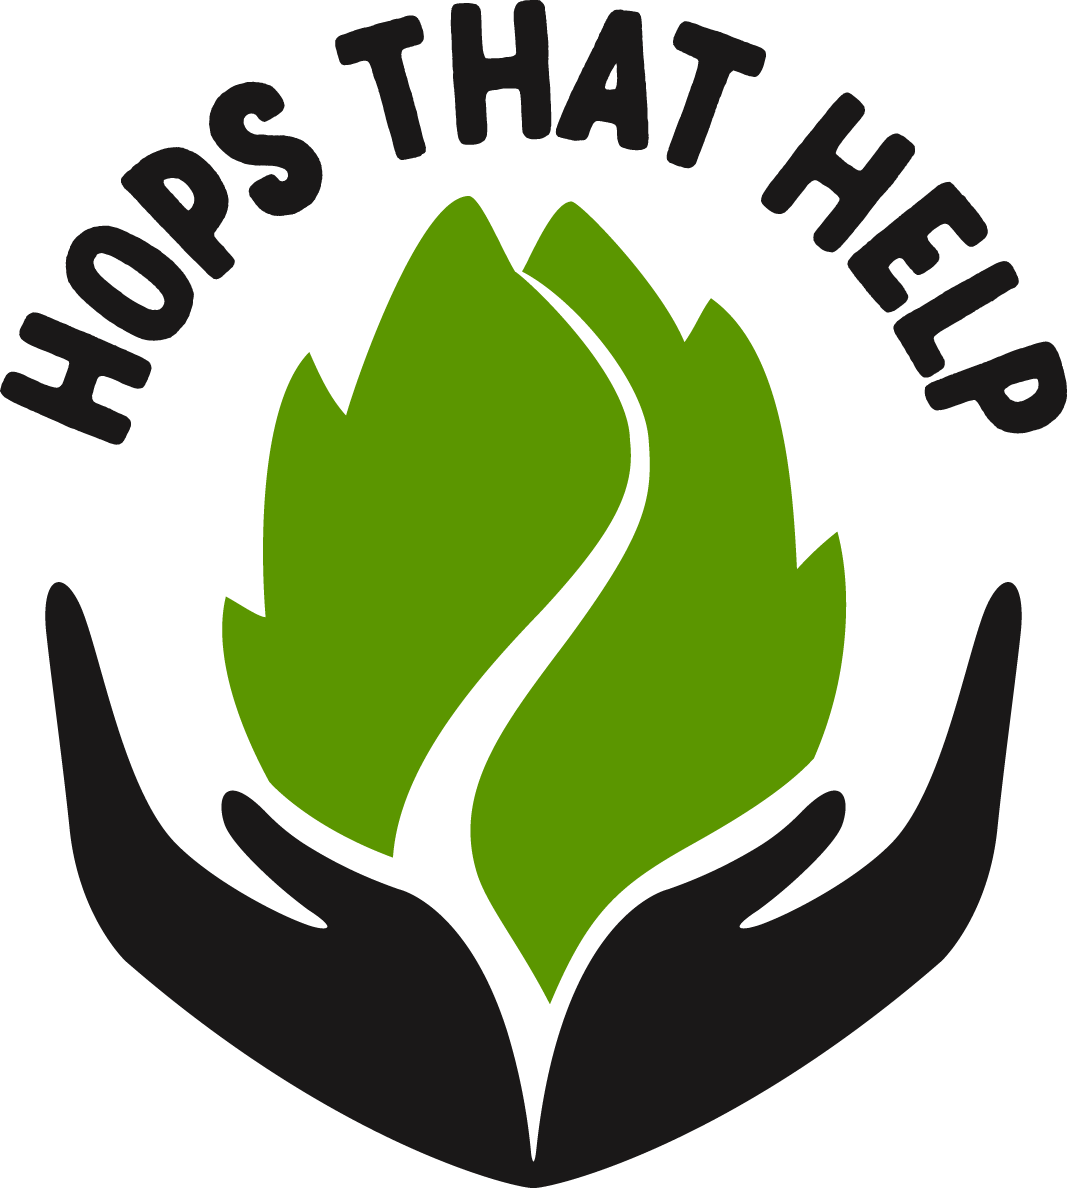 hop that helps logo